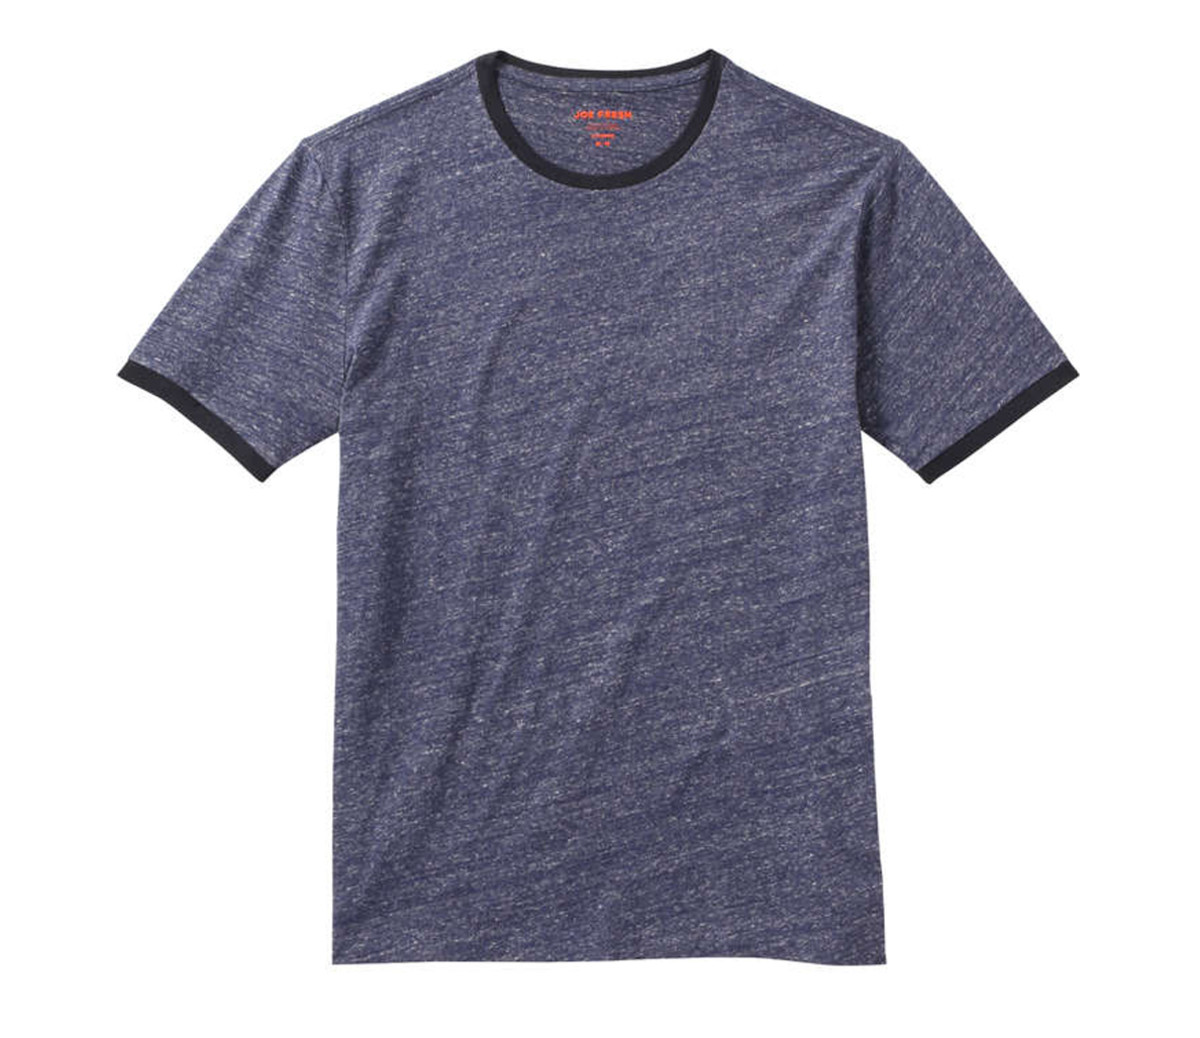 10 Best T-Shirts for Every Body Type | Men's Journal - Men's Journal